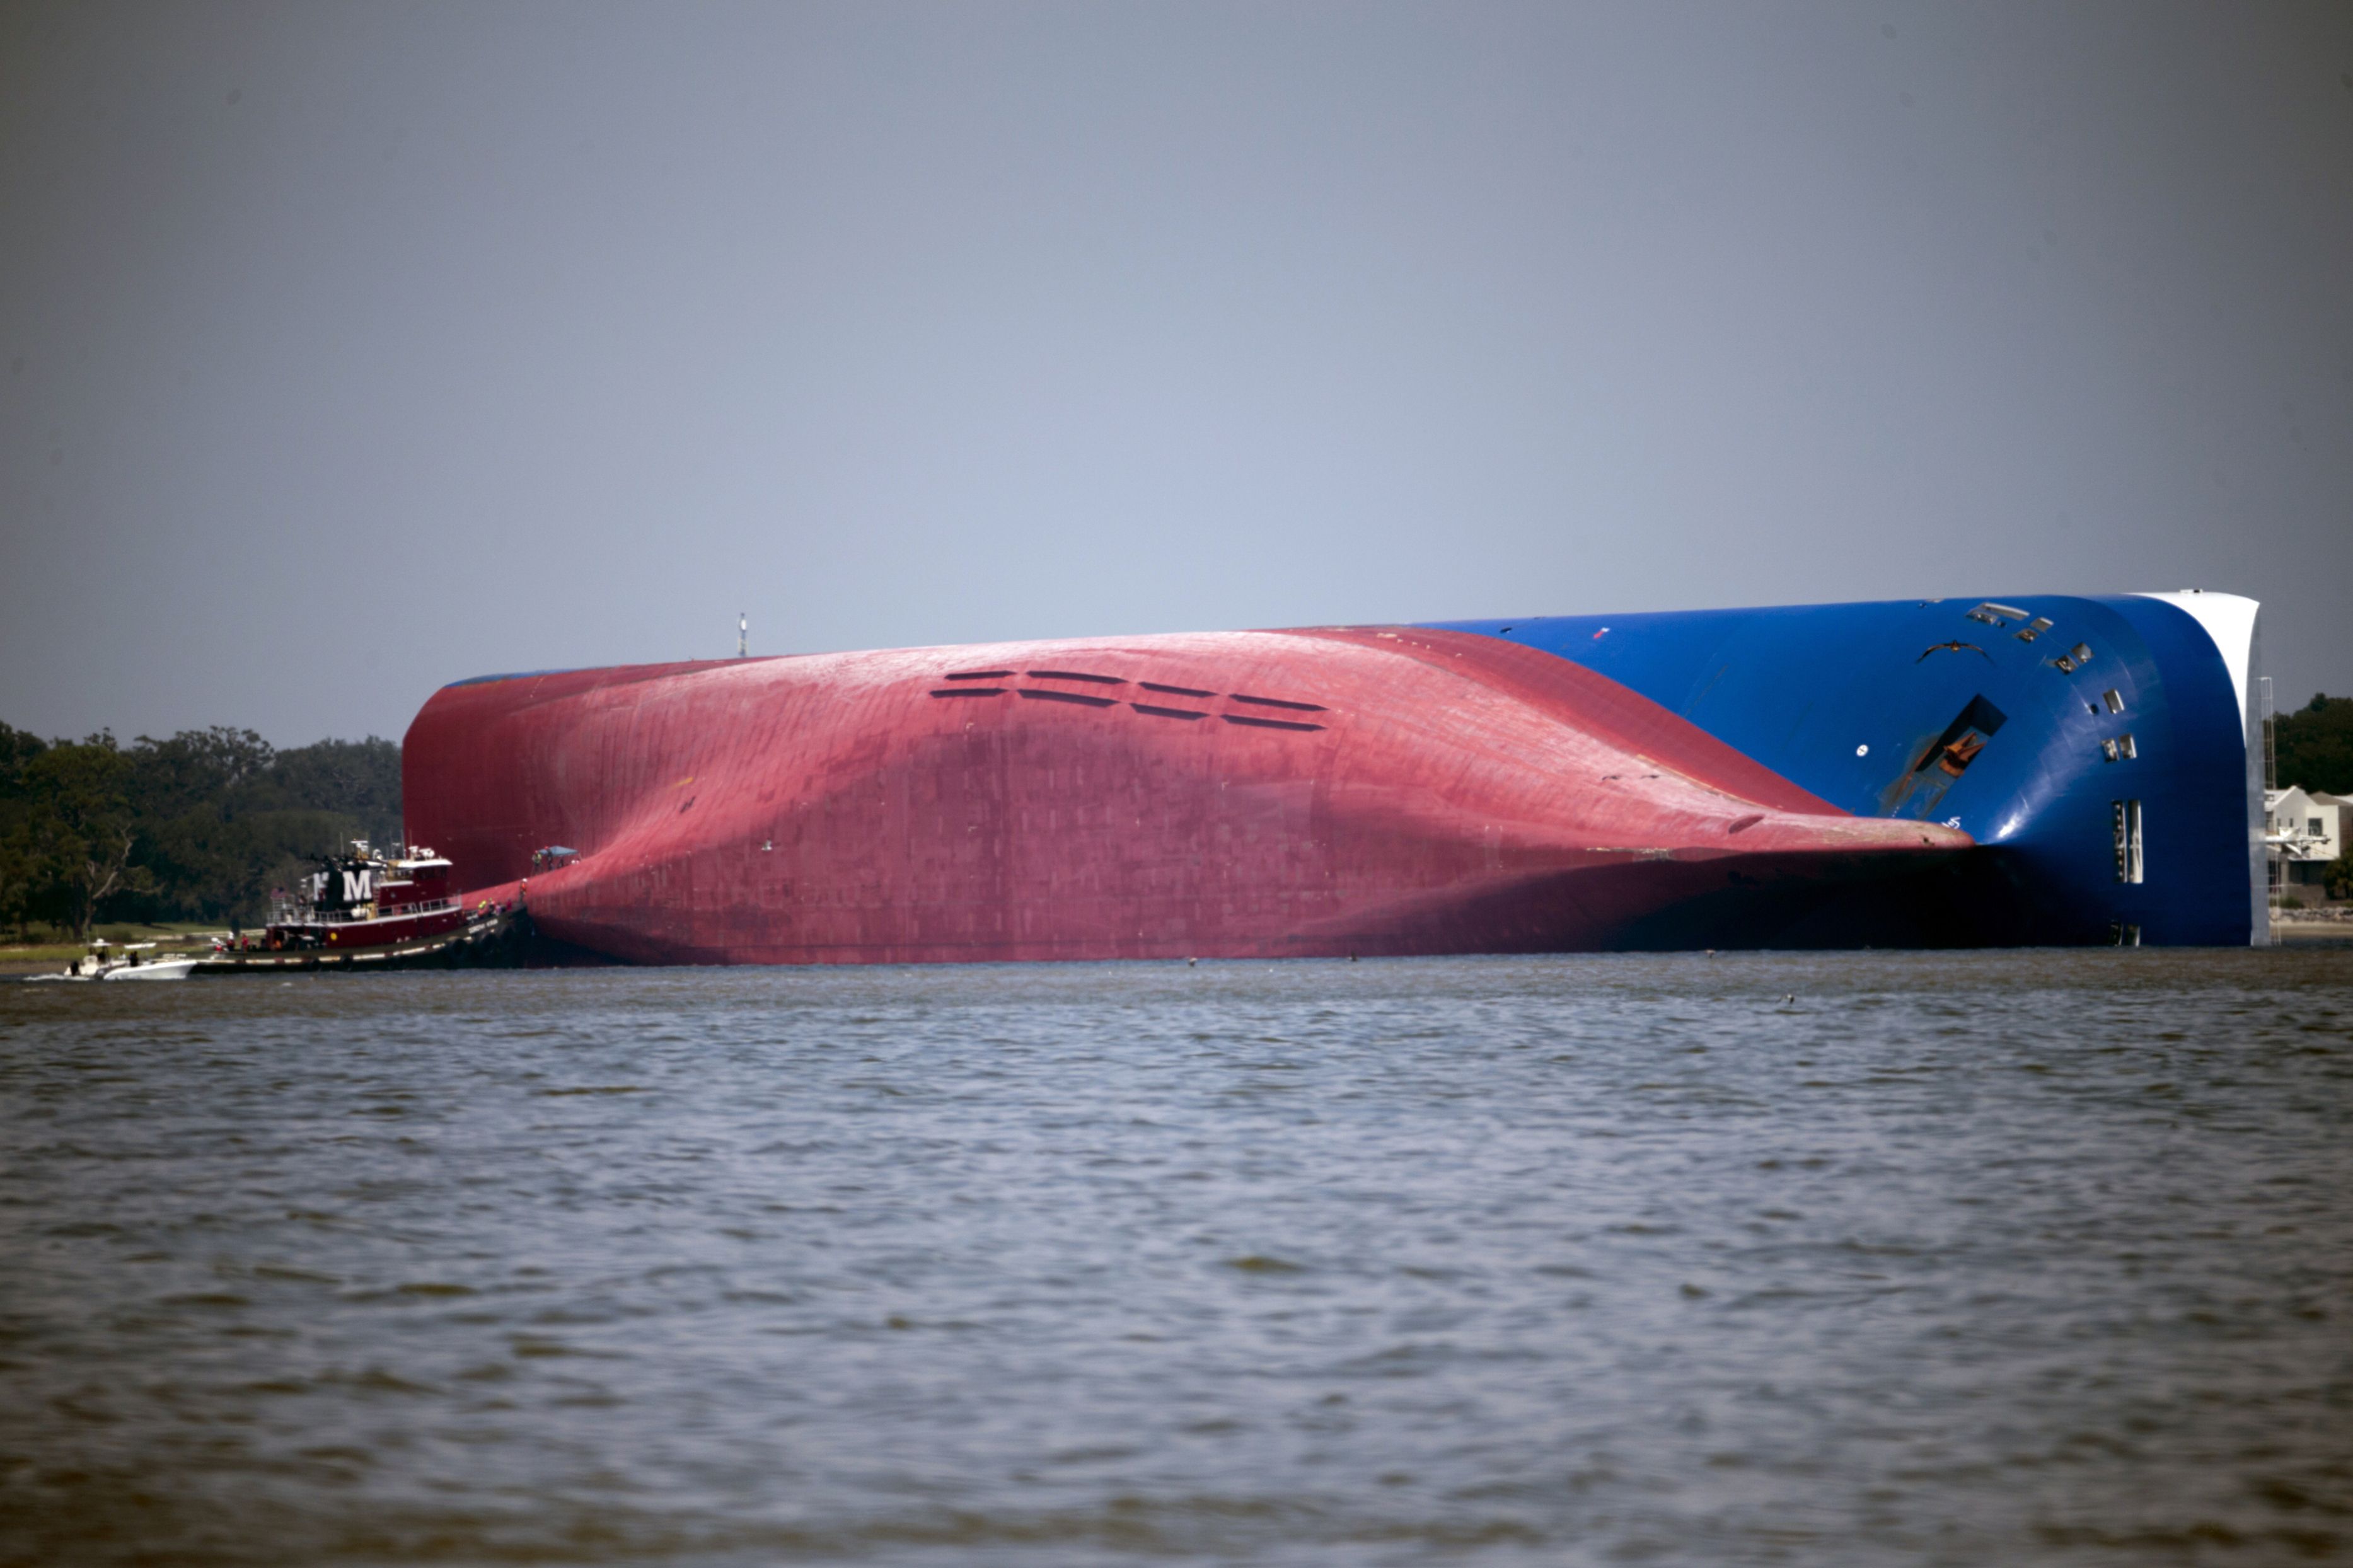 Alarms, shouts recorded before cargo ship Golden Ray overturned off Georgia